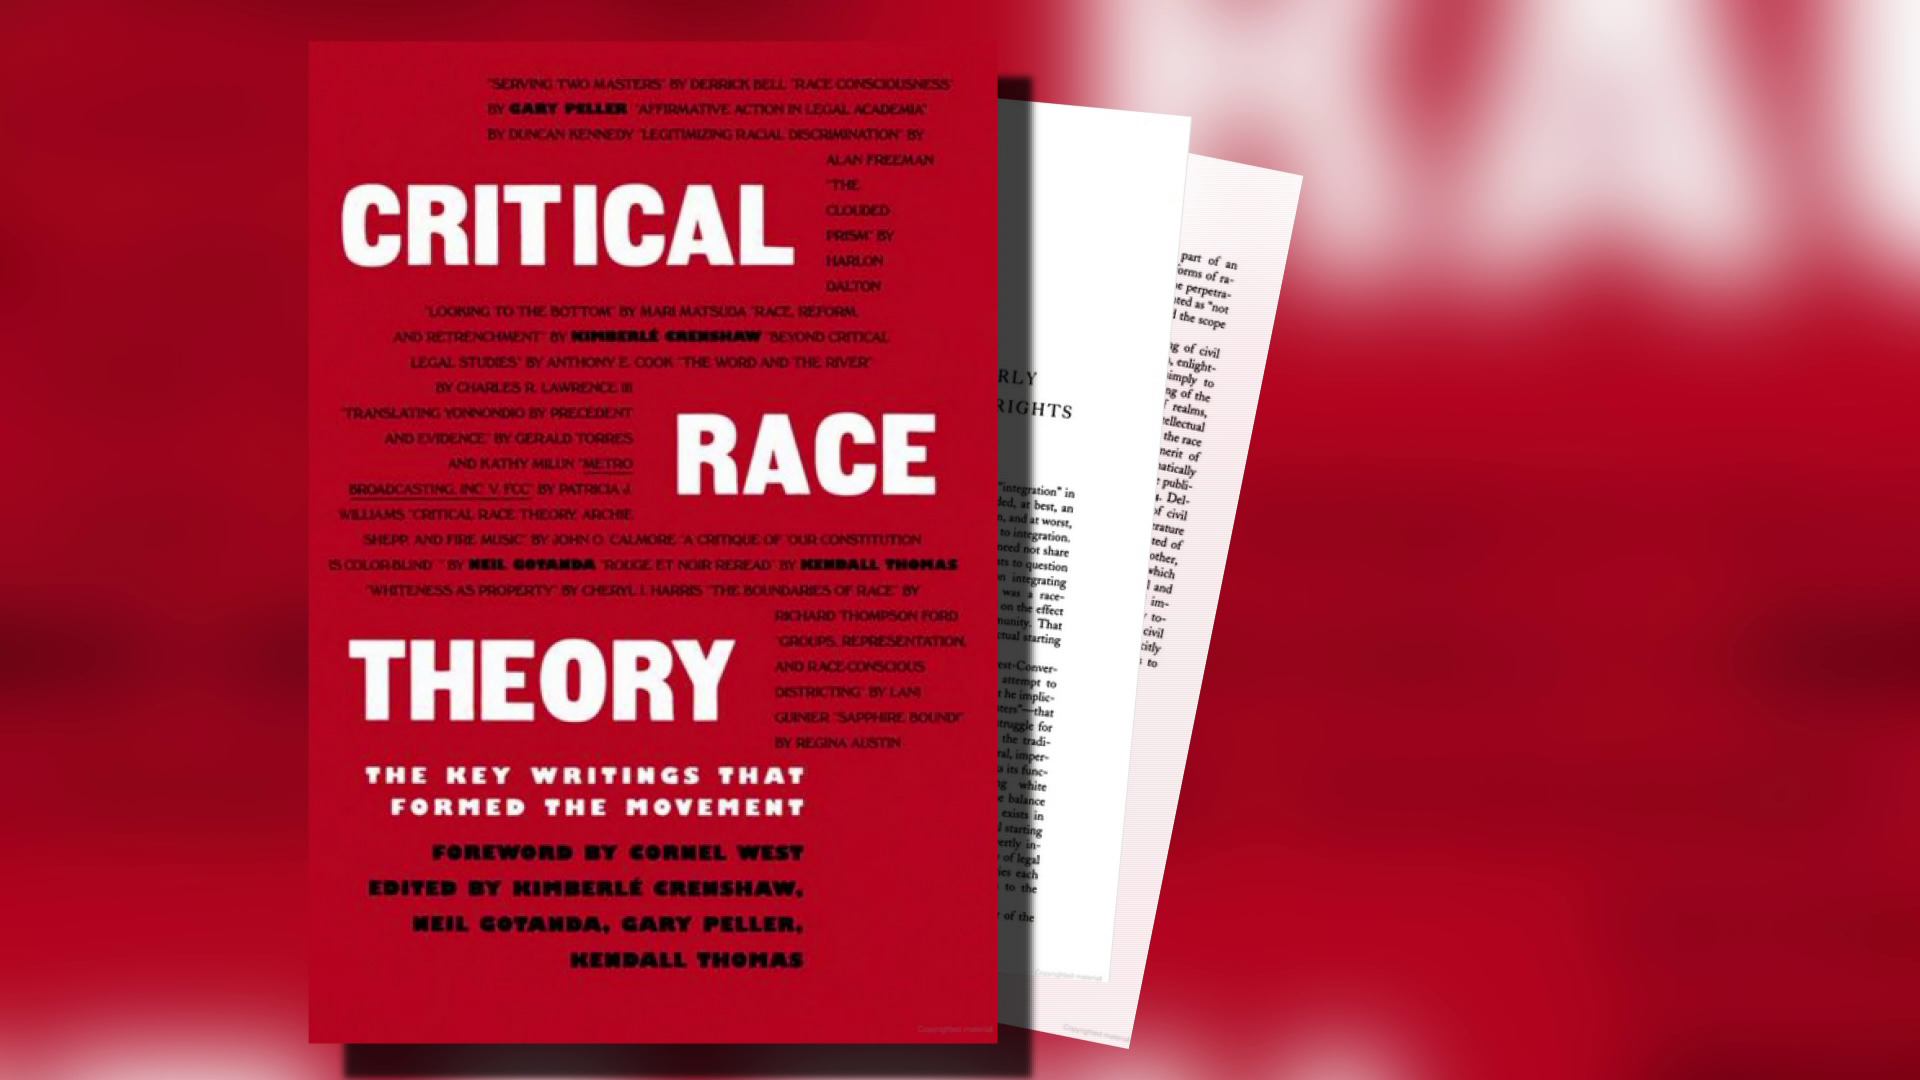 Critical race theory: What it actually means